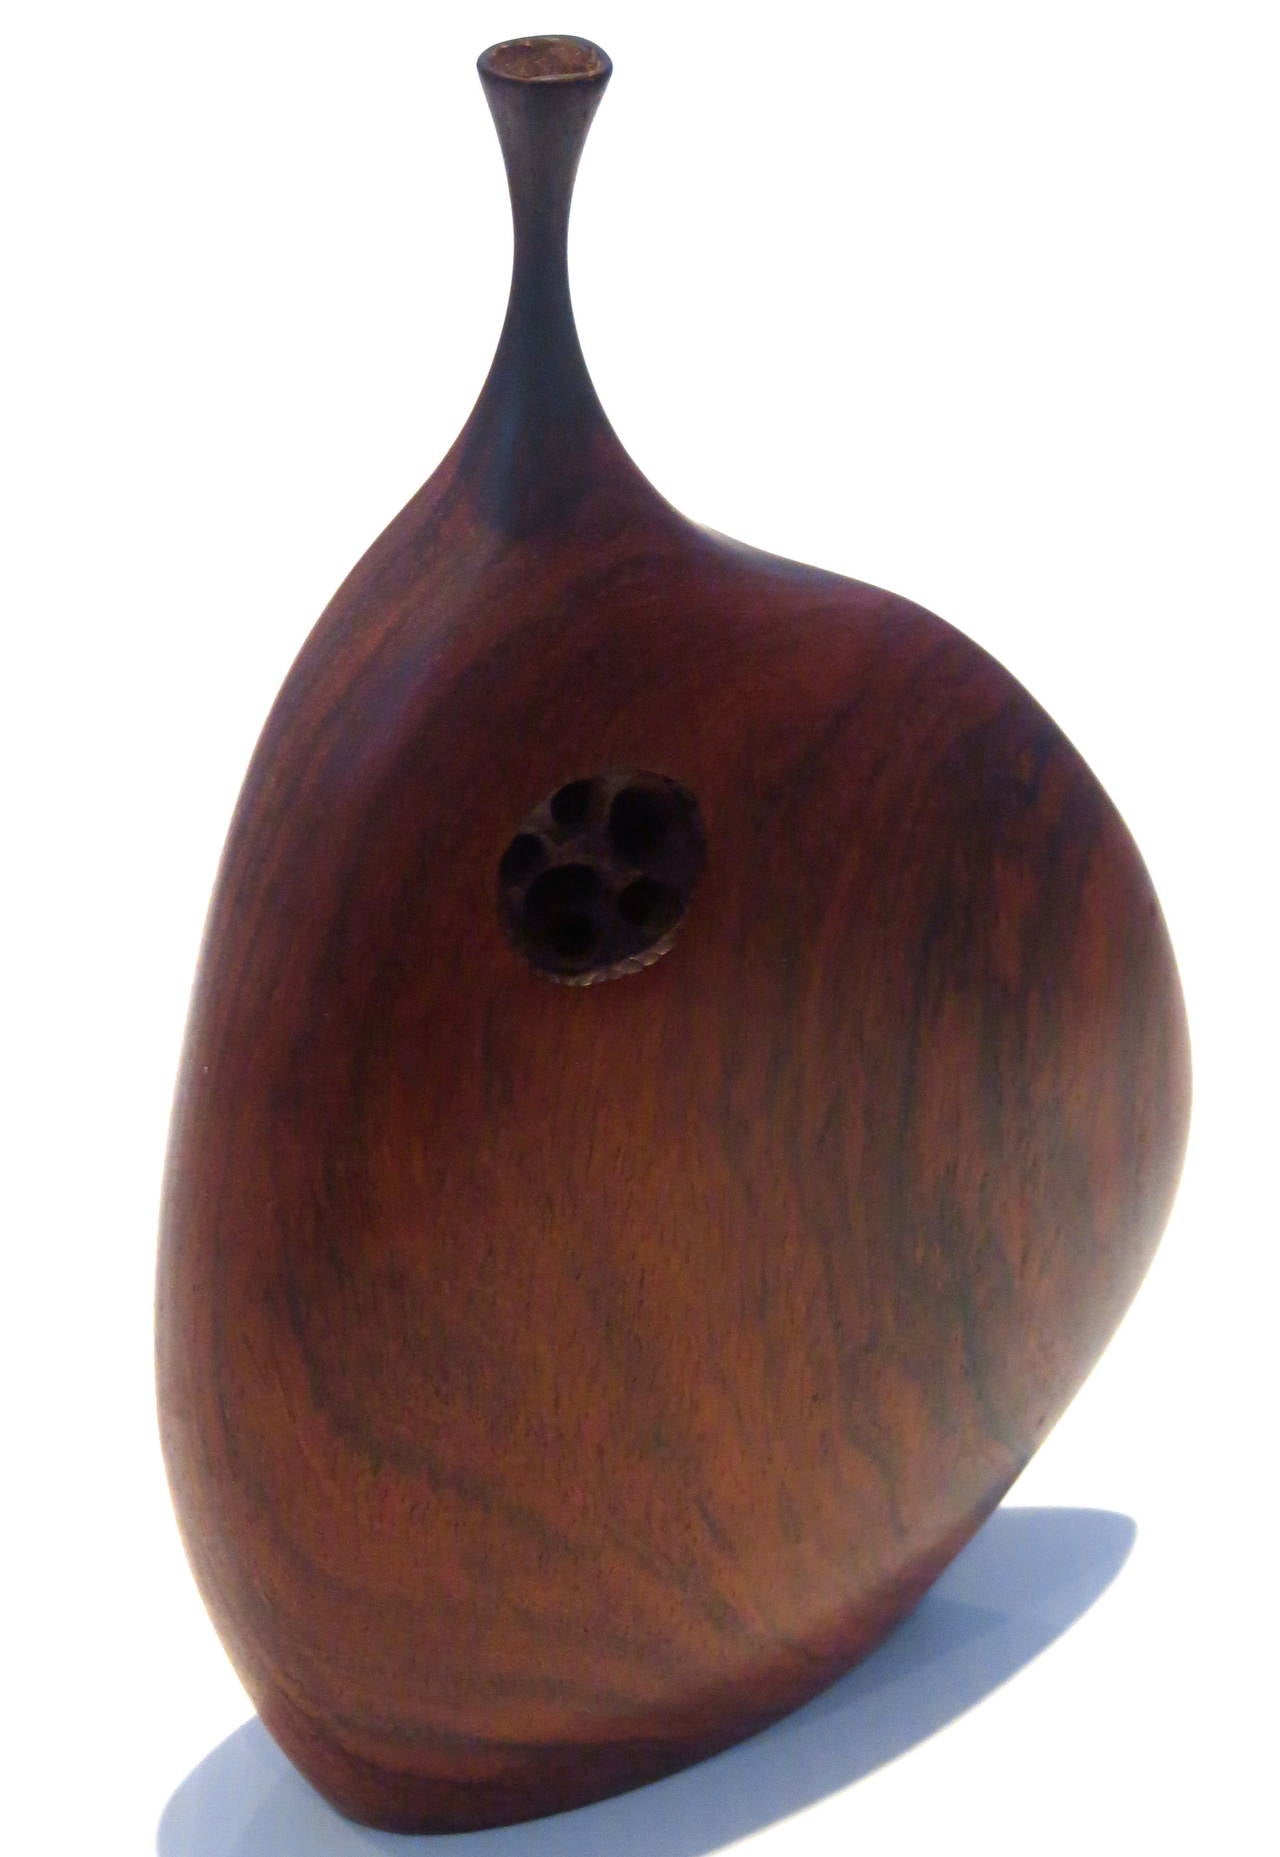 Rosewood 1960s California Design Mid-Century Modern Hand-Carved Wood Vase by Doug Ayers